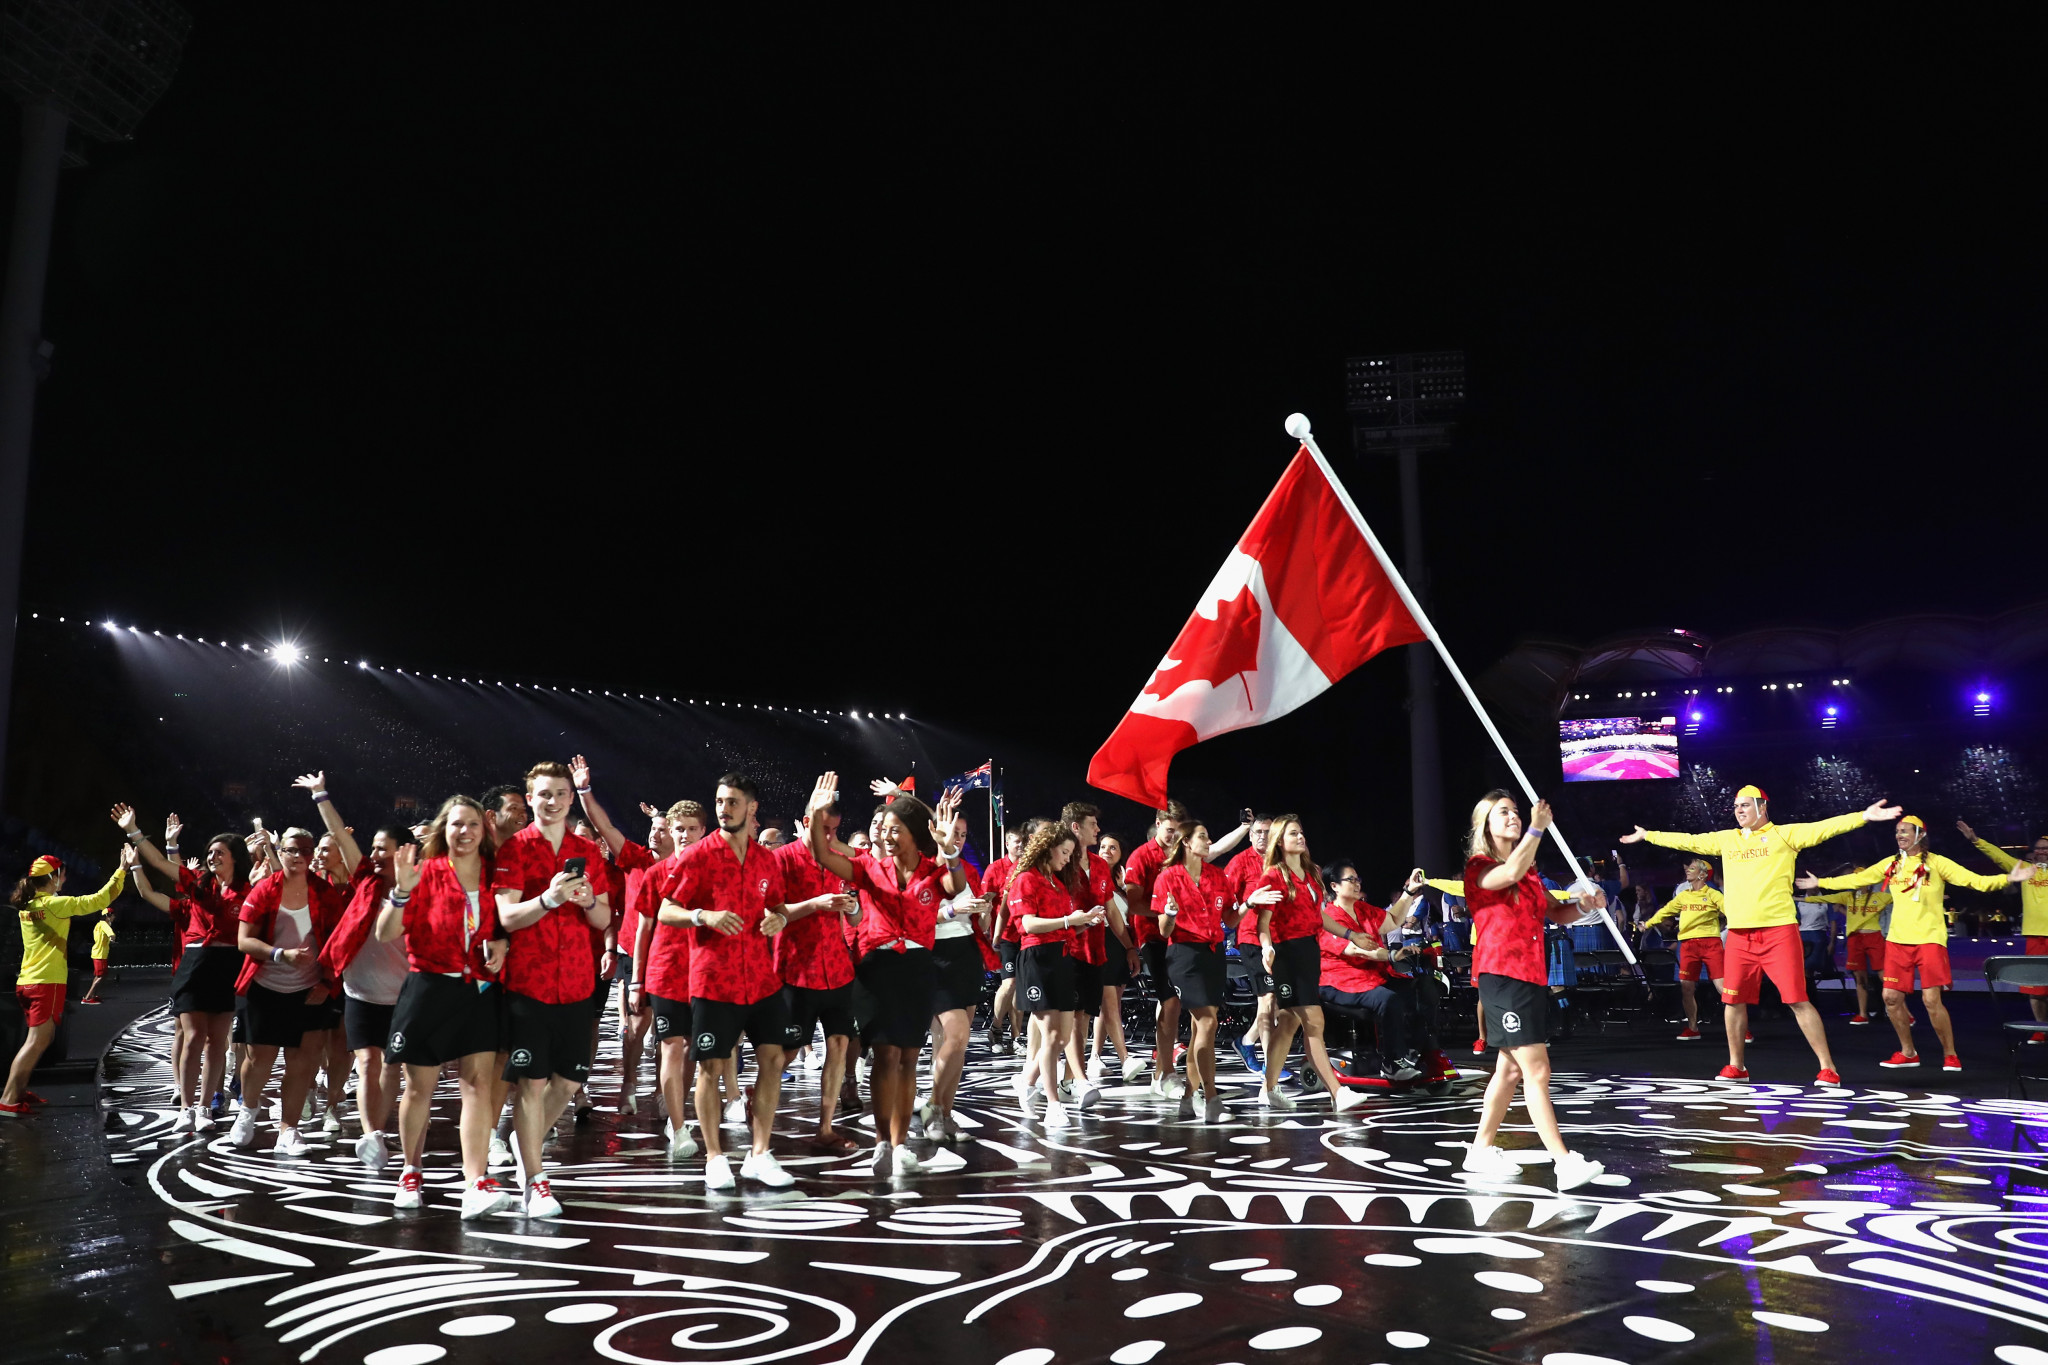 Canada finished fourth on the medals table at the Gold Coast 2018 Commonwealth Games ©Getty Images